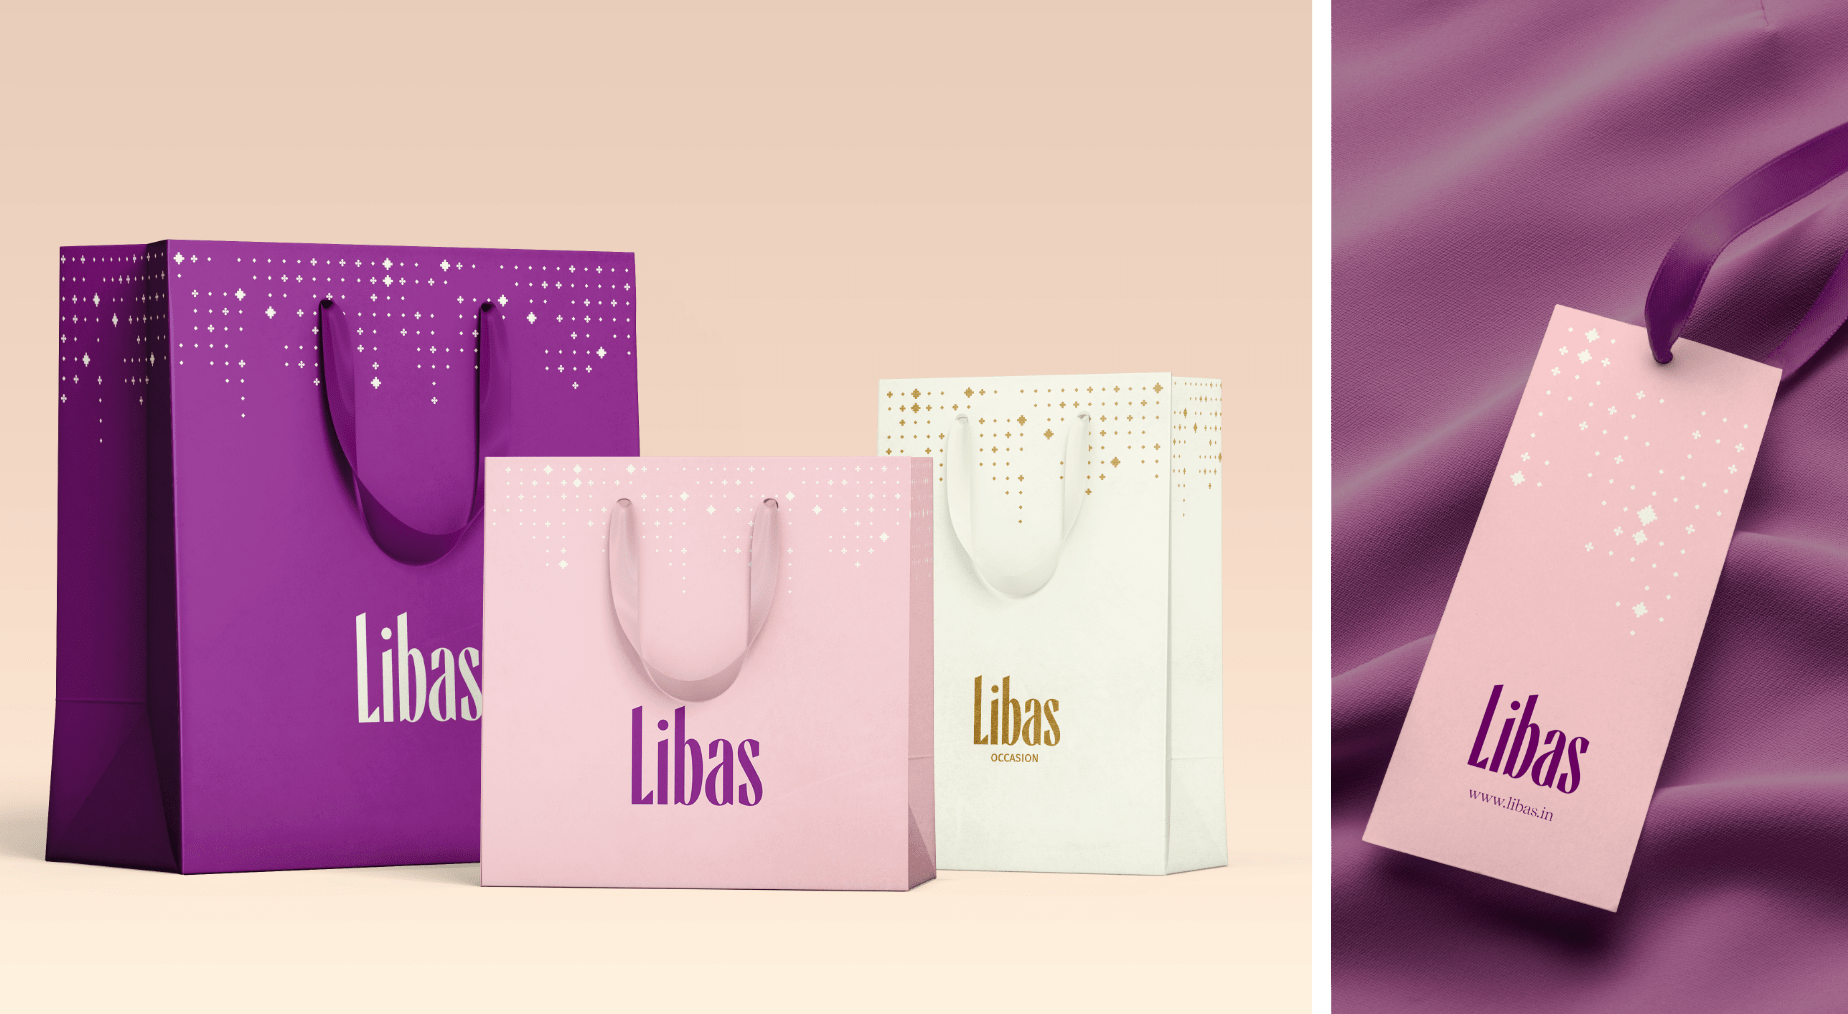 Shopping bag and label design for Libas packaging